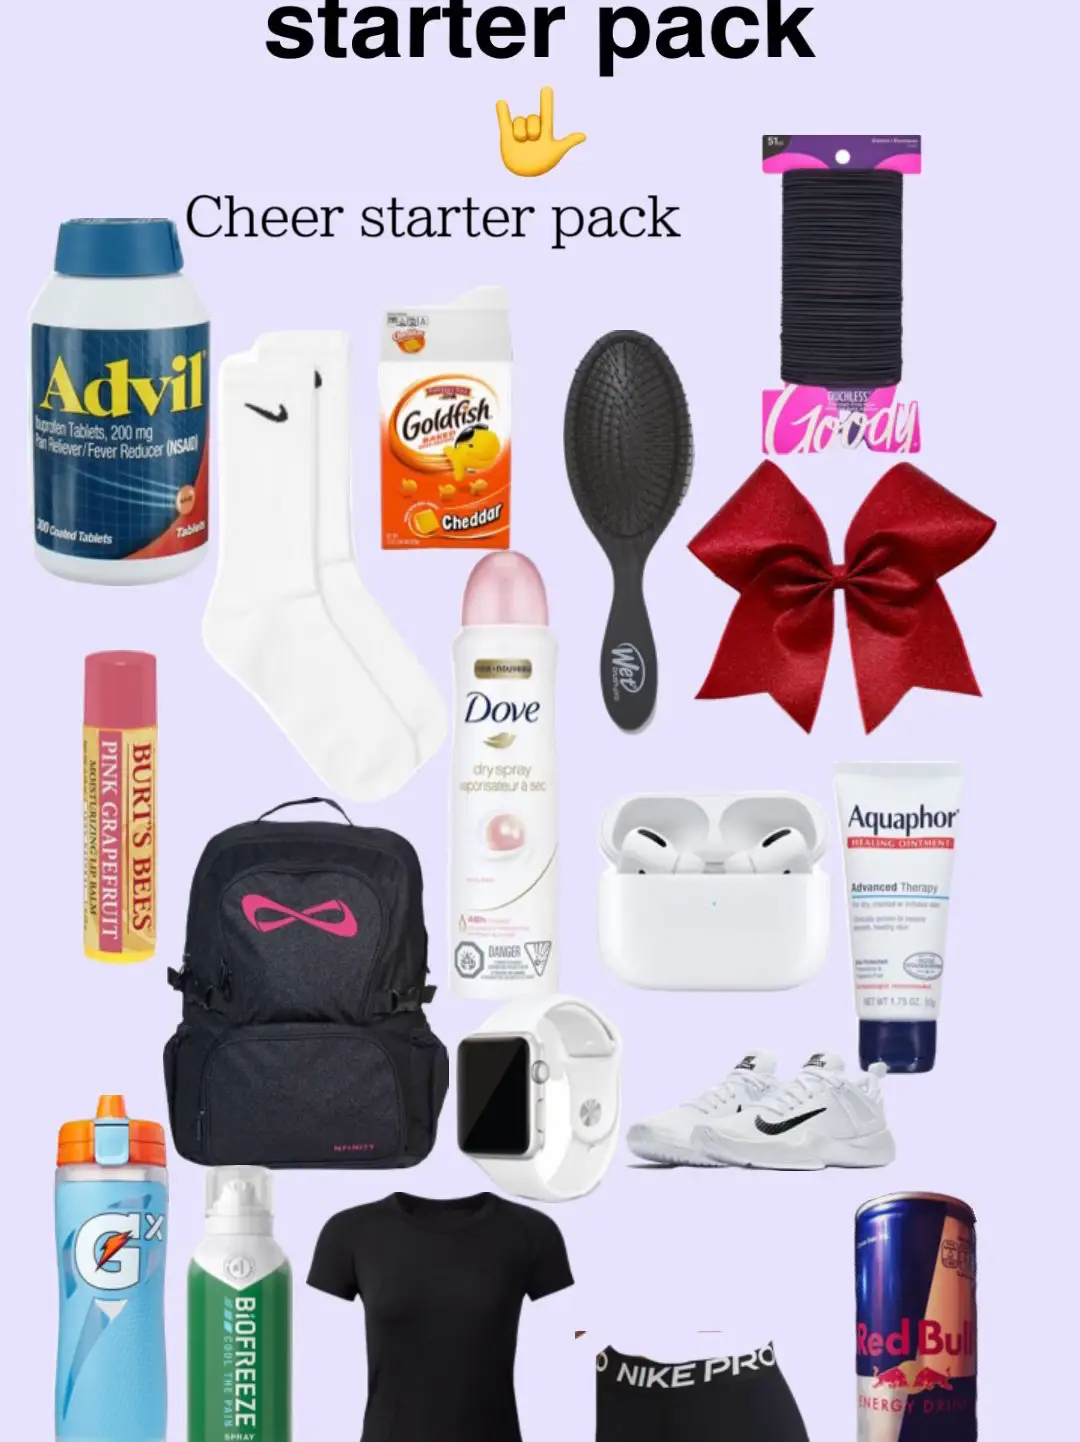 staying organized for cheer - Lemon8 Search